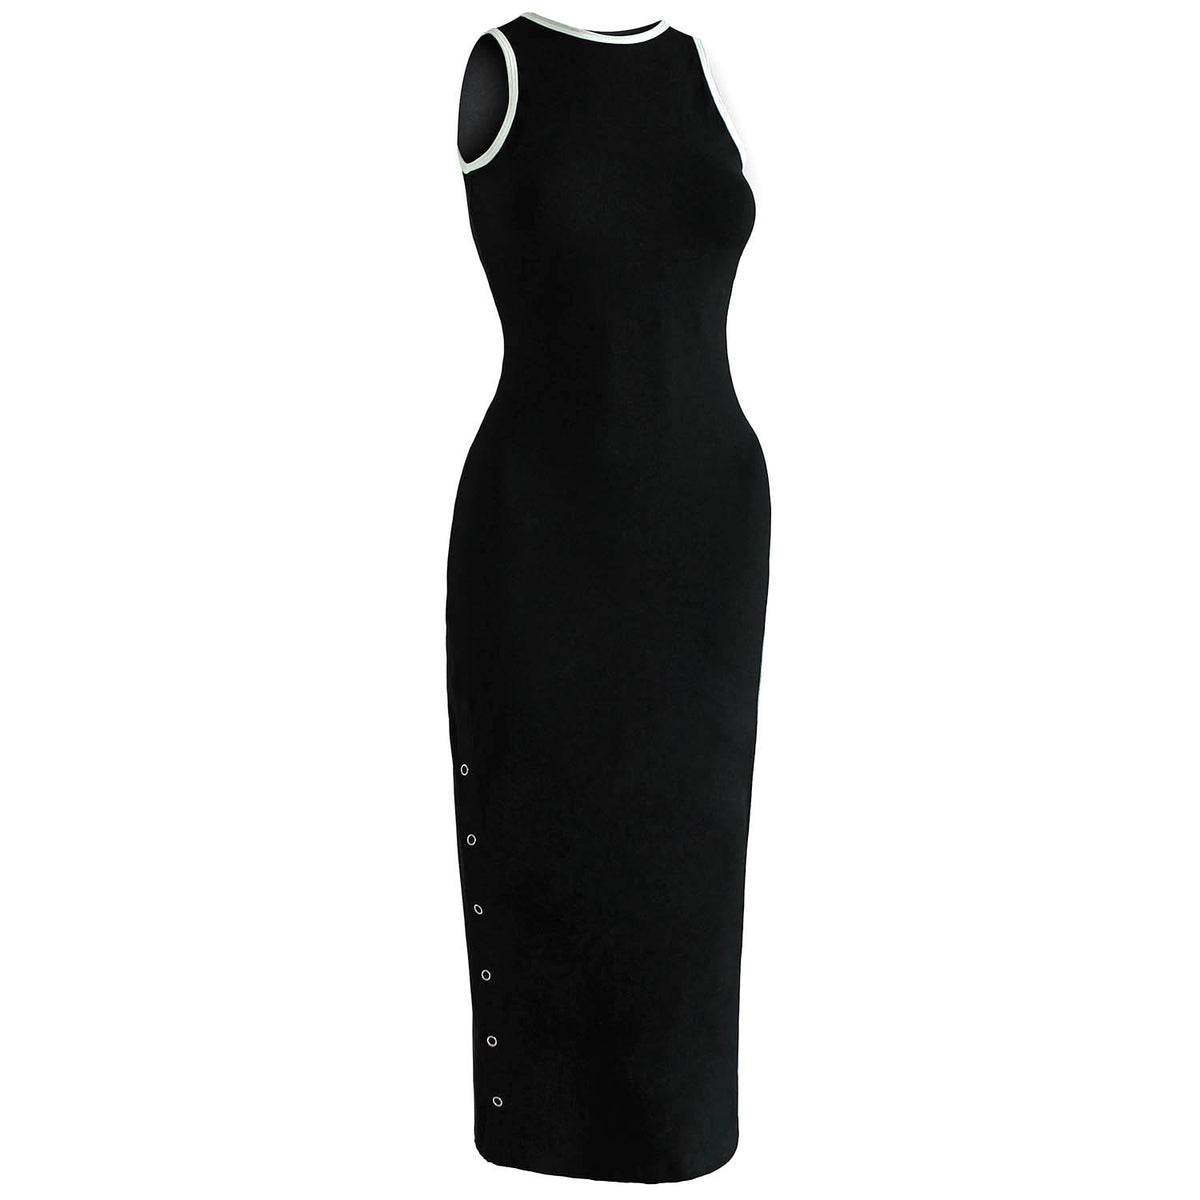 Black Ola bodycon fitted dress made of OCS certified organic cotton fabric in black and white color